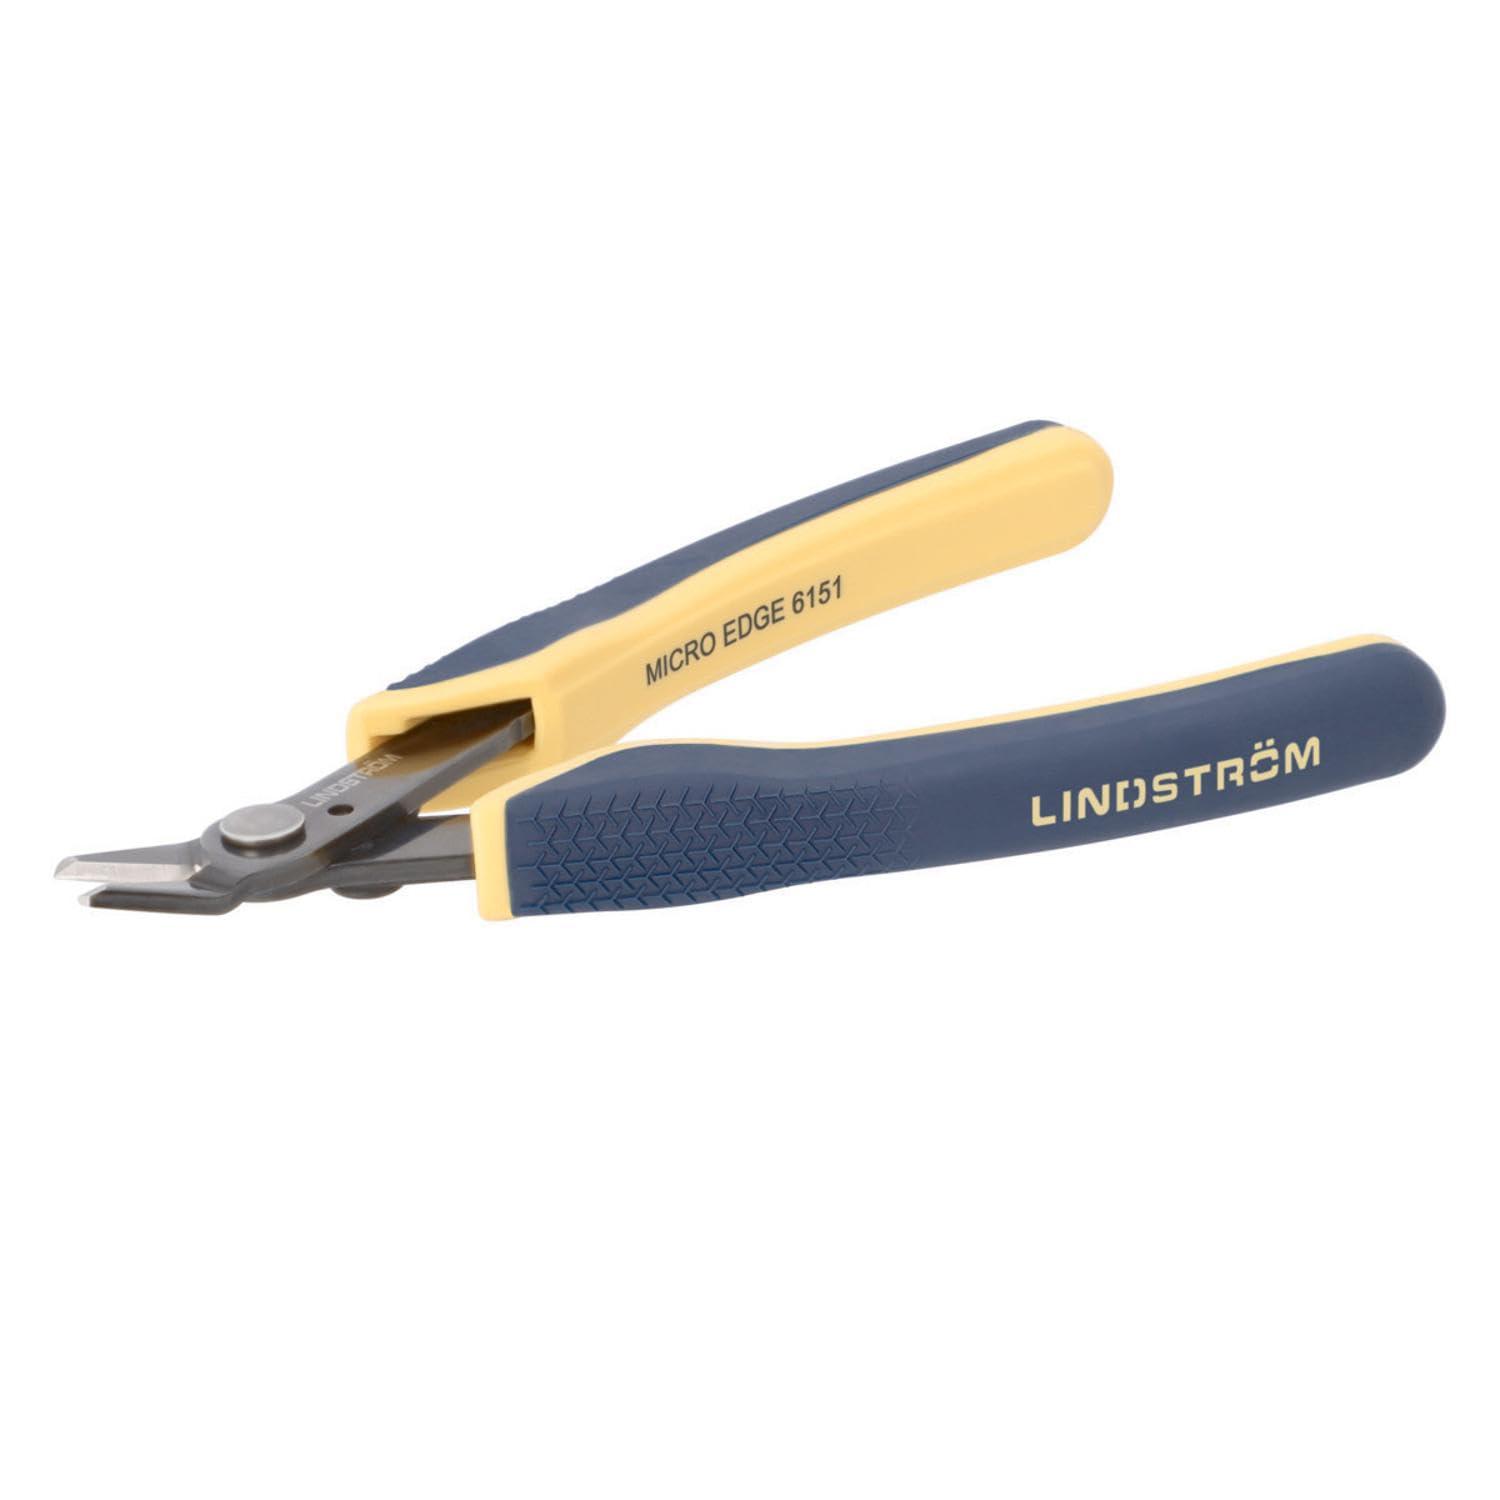 lindstrom edge 6151 micro tapered-shear cutters | plr-6151